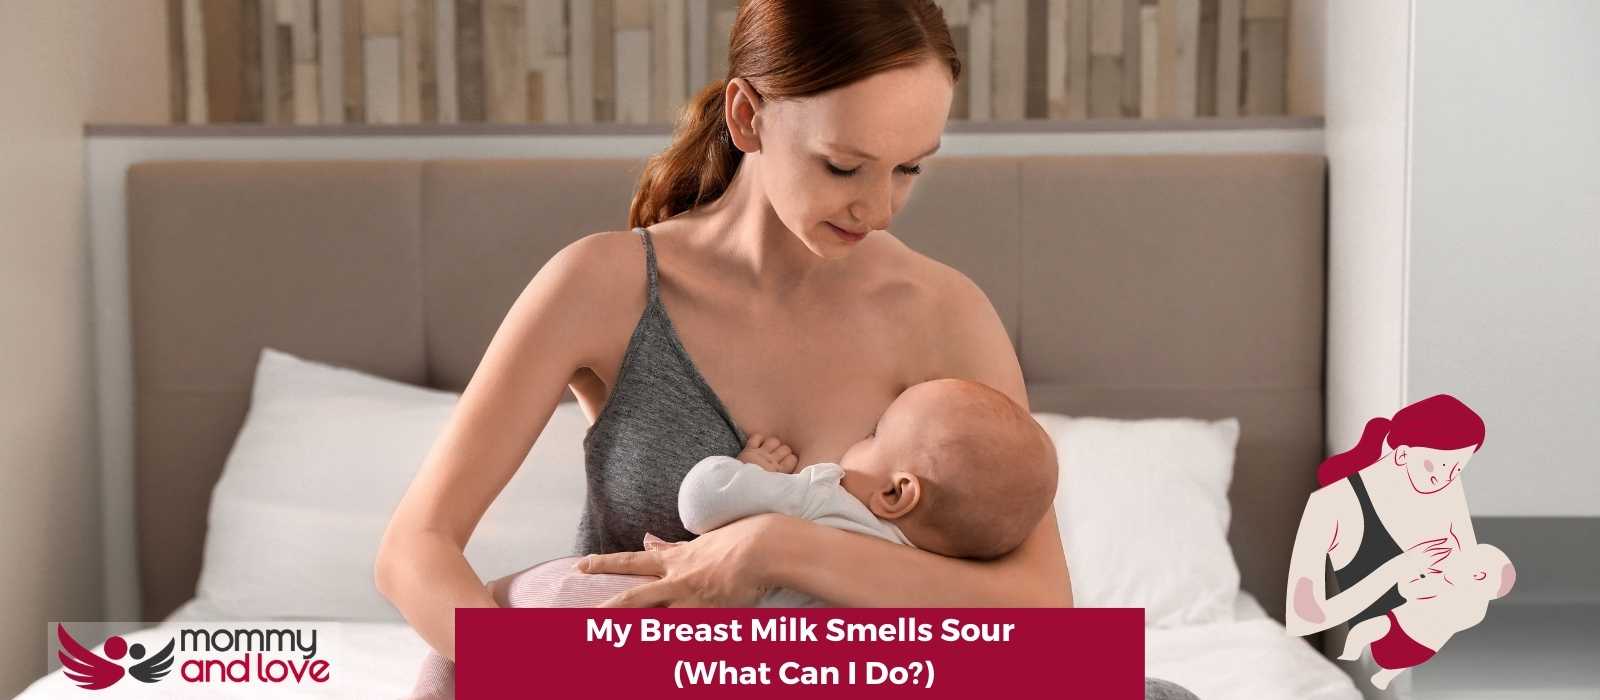 My Breast Milk Smells Sour (What Can I Do)